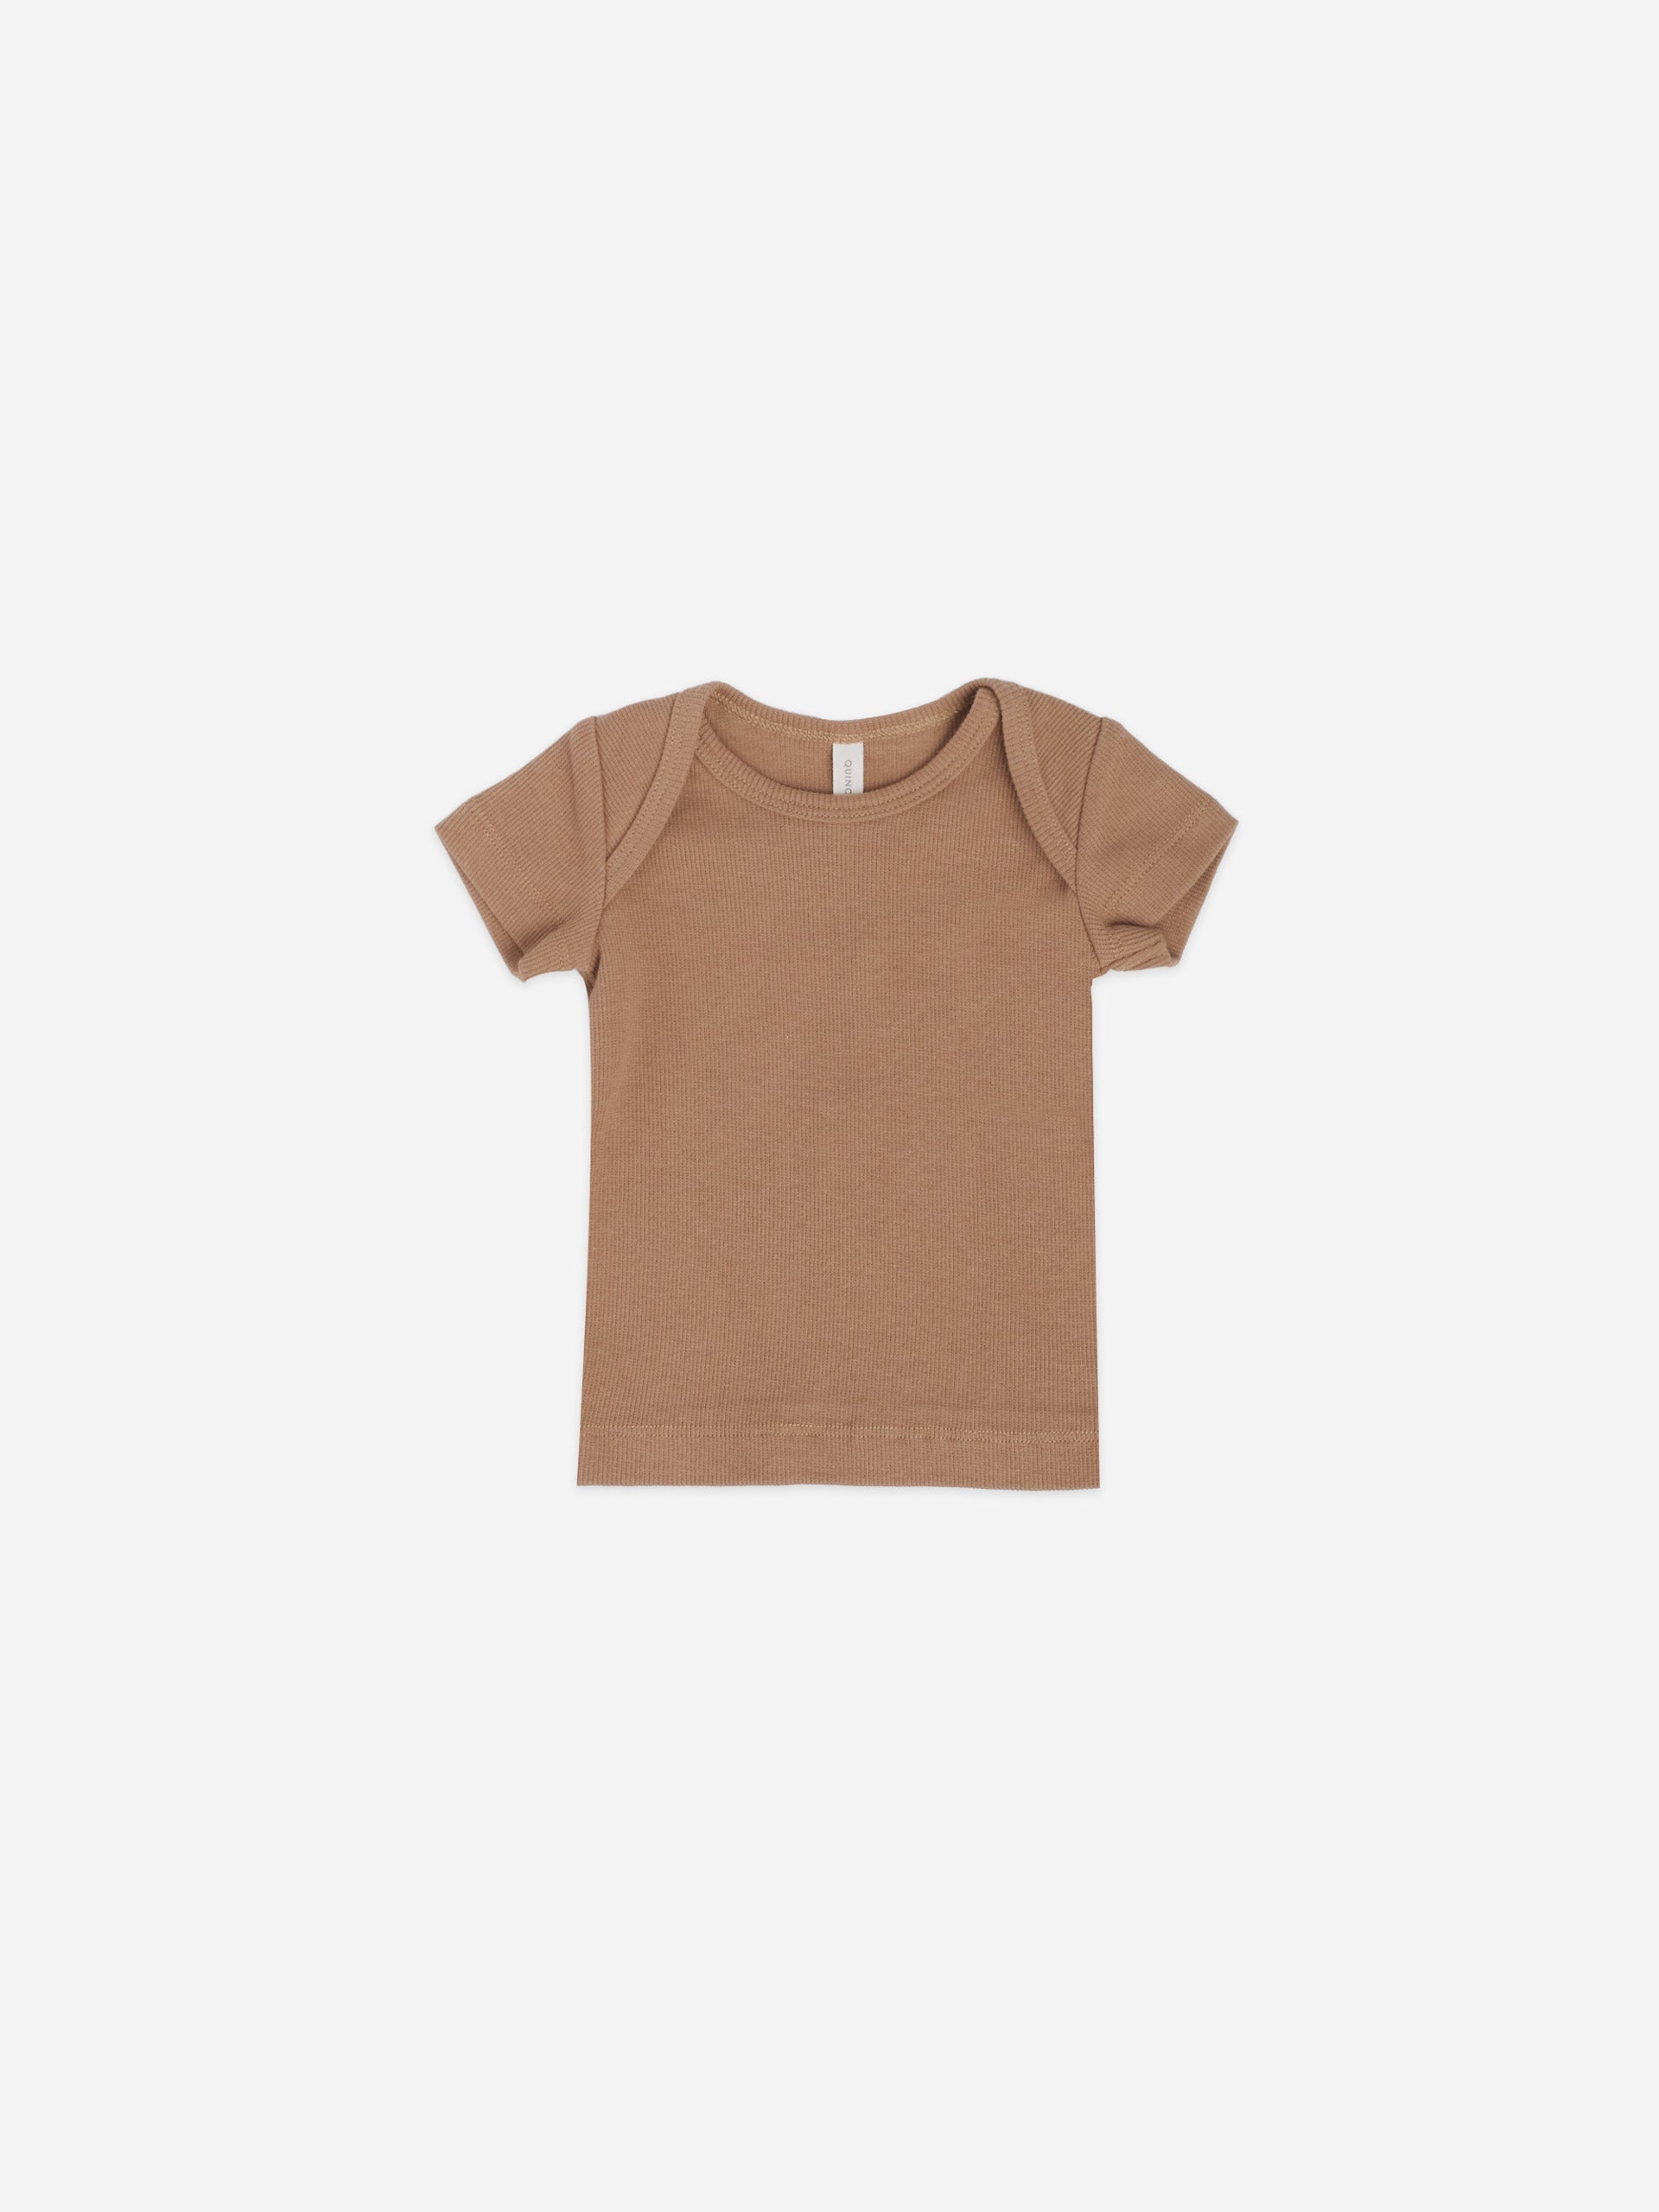 ribbed short sleeve tee | clay - Quincy Mae | Baby Basics | Baby Clothing | Organic Baby Clothes | Modern Baby Boy Clothes |